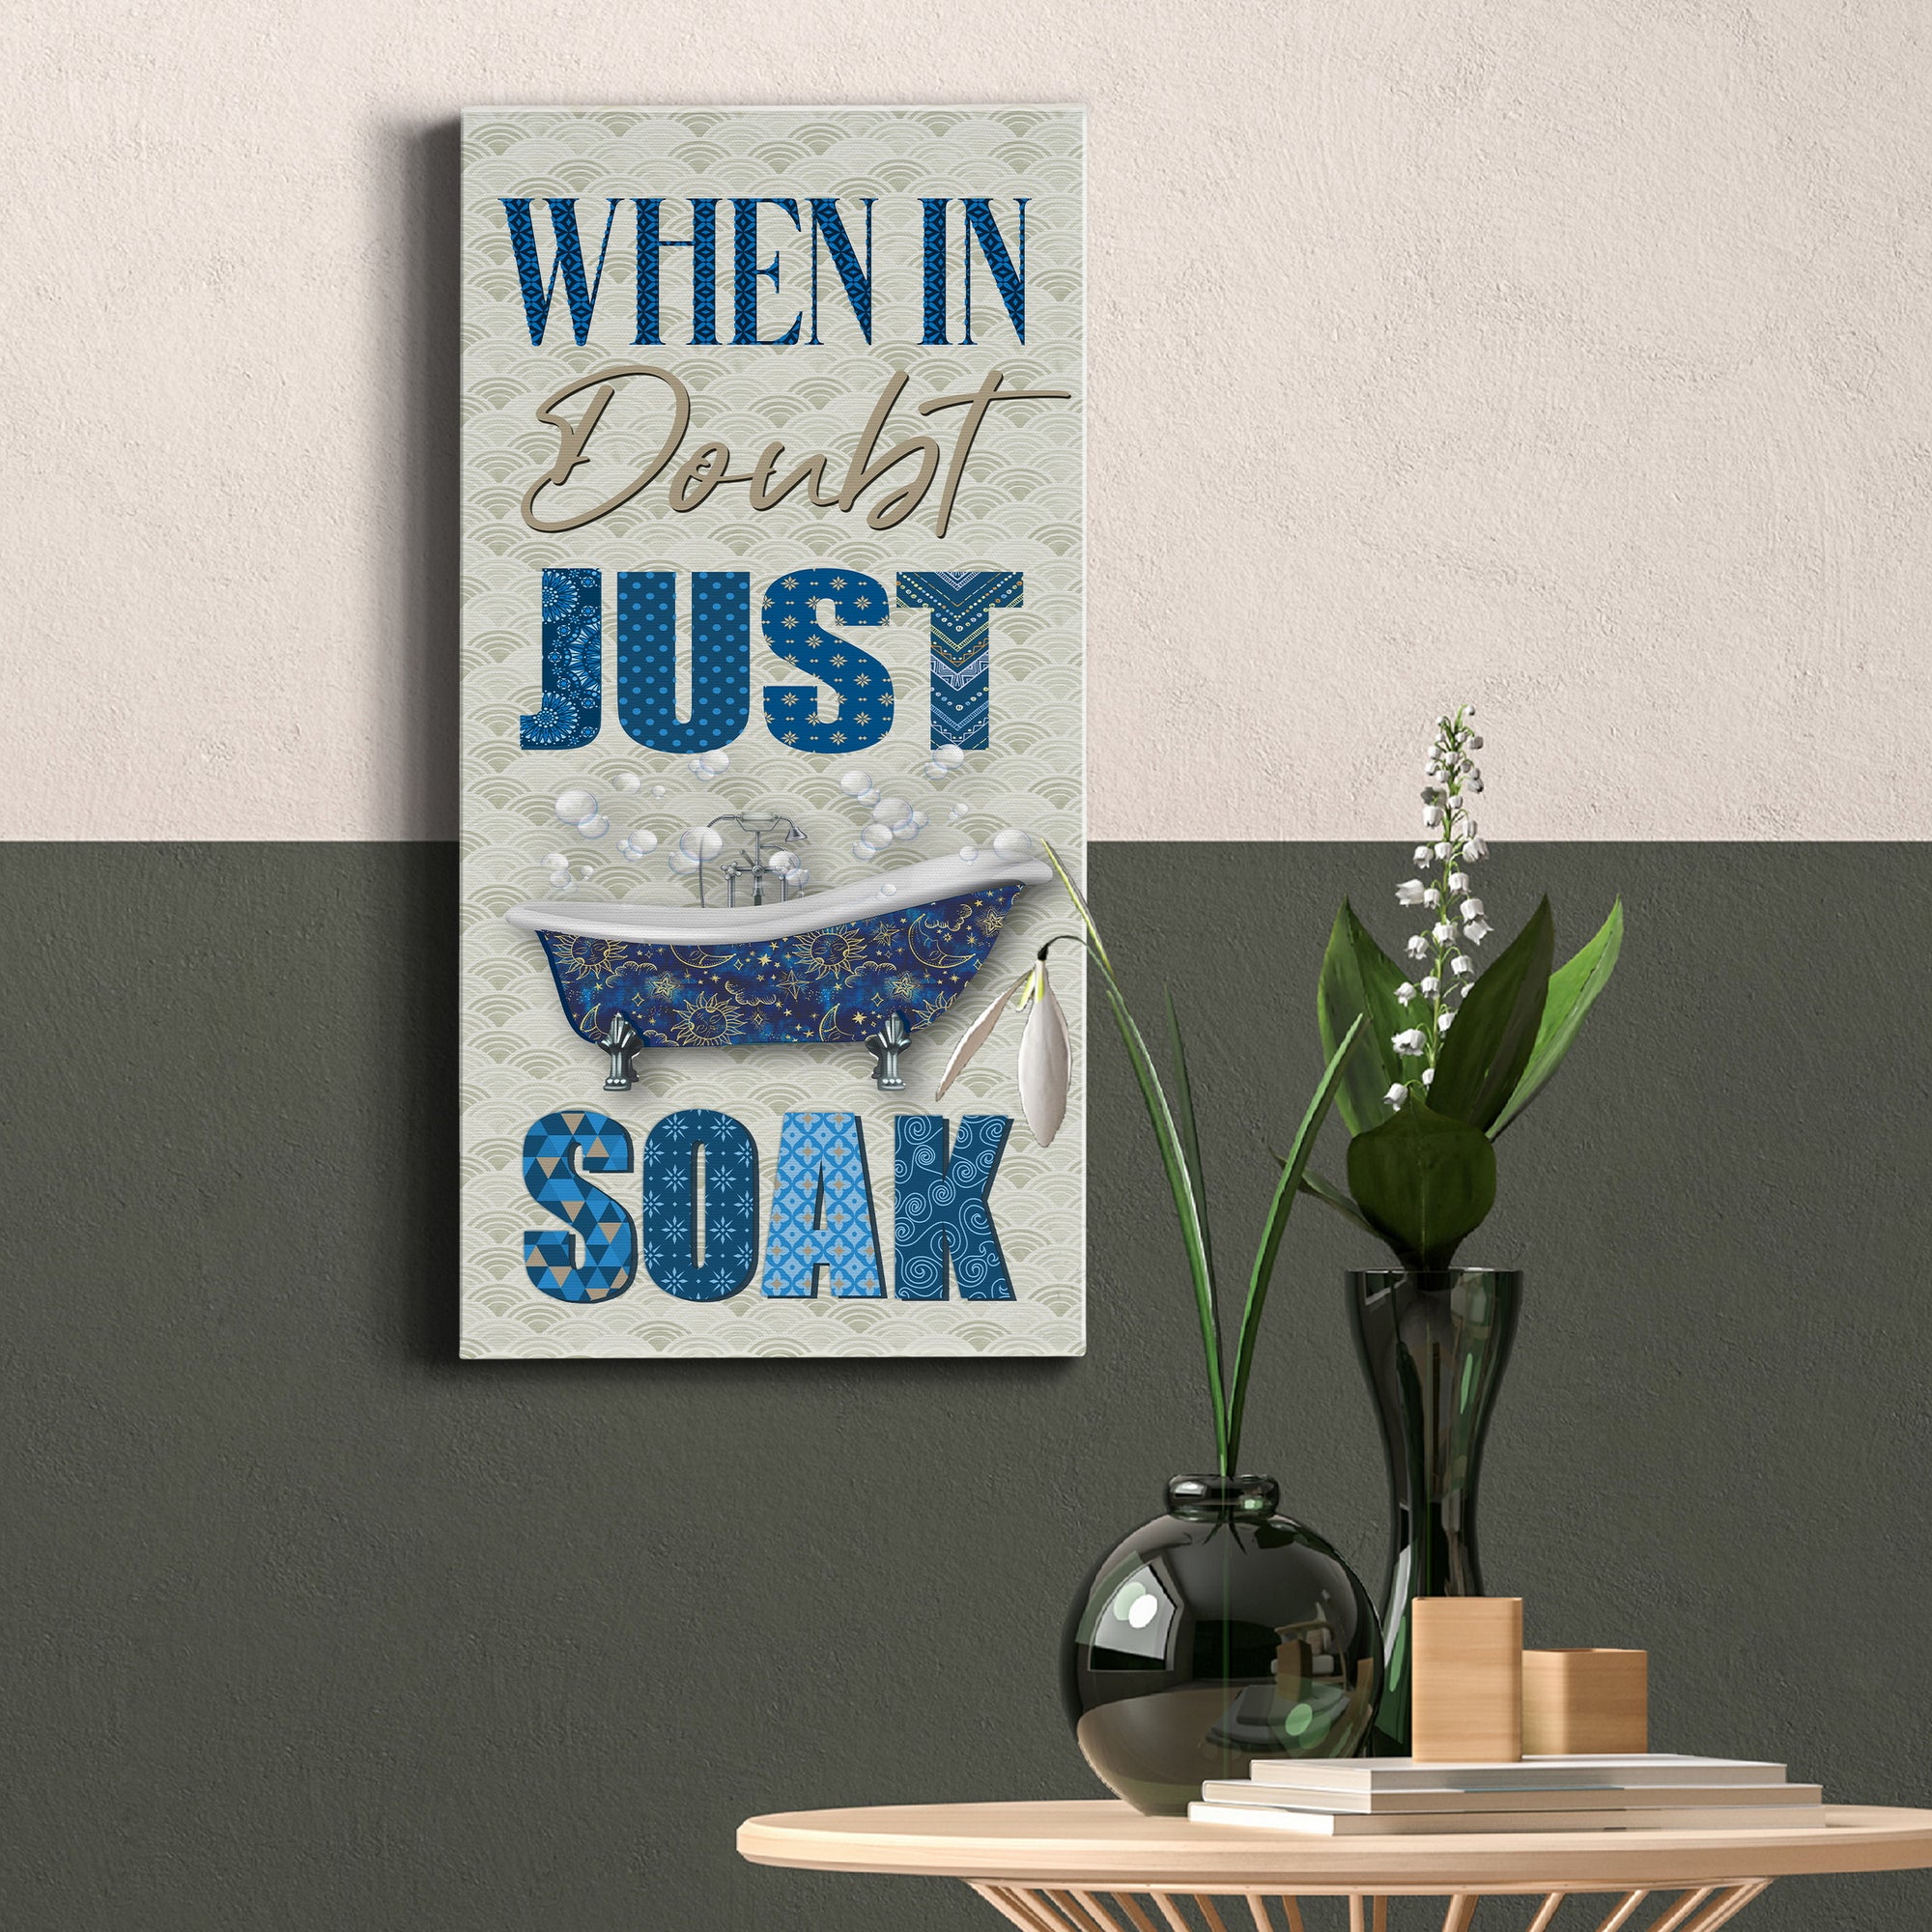 When in Doubt - Premium Gallery Wrapped Canvas - Ready to Hang